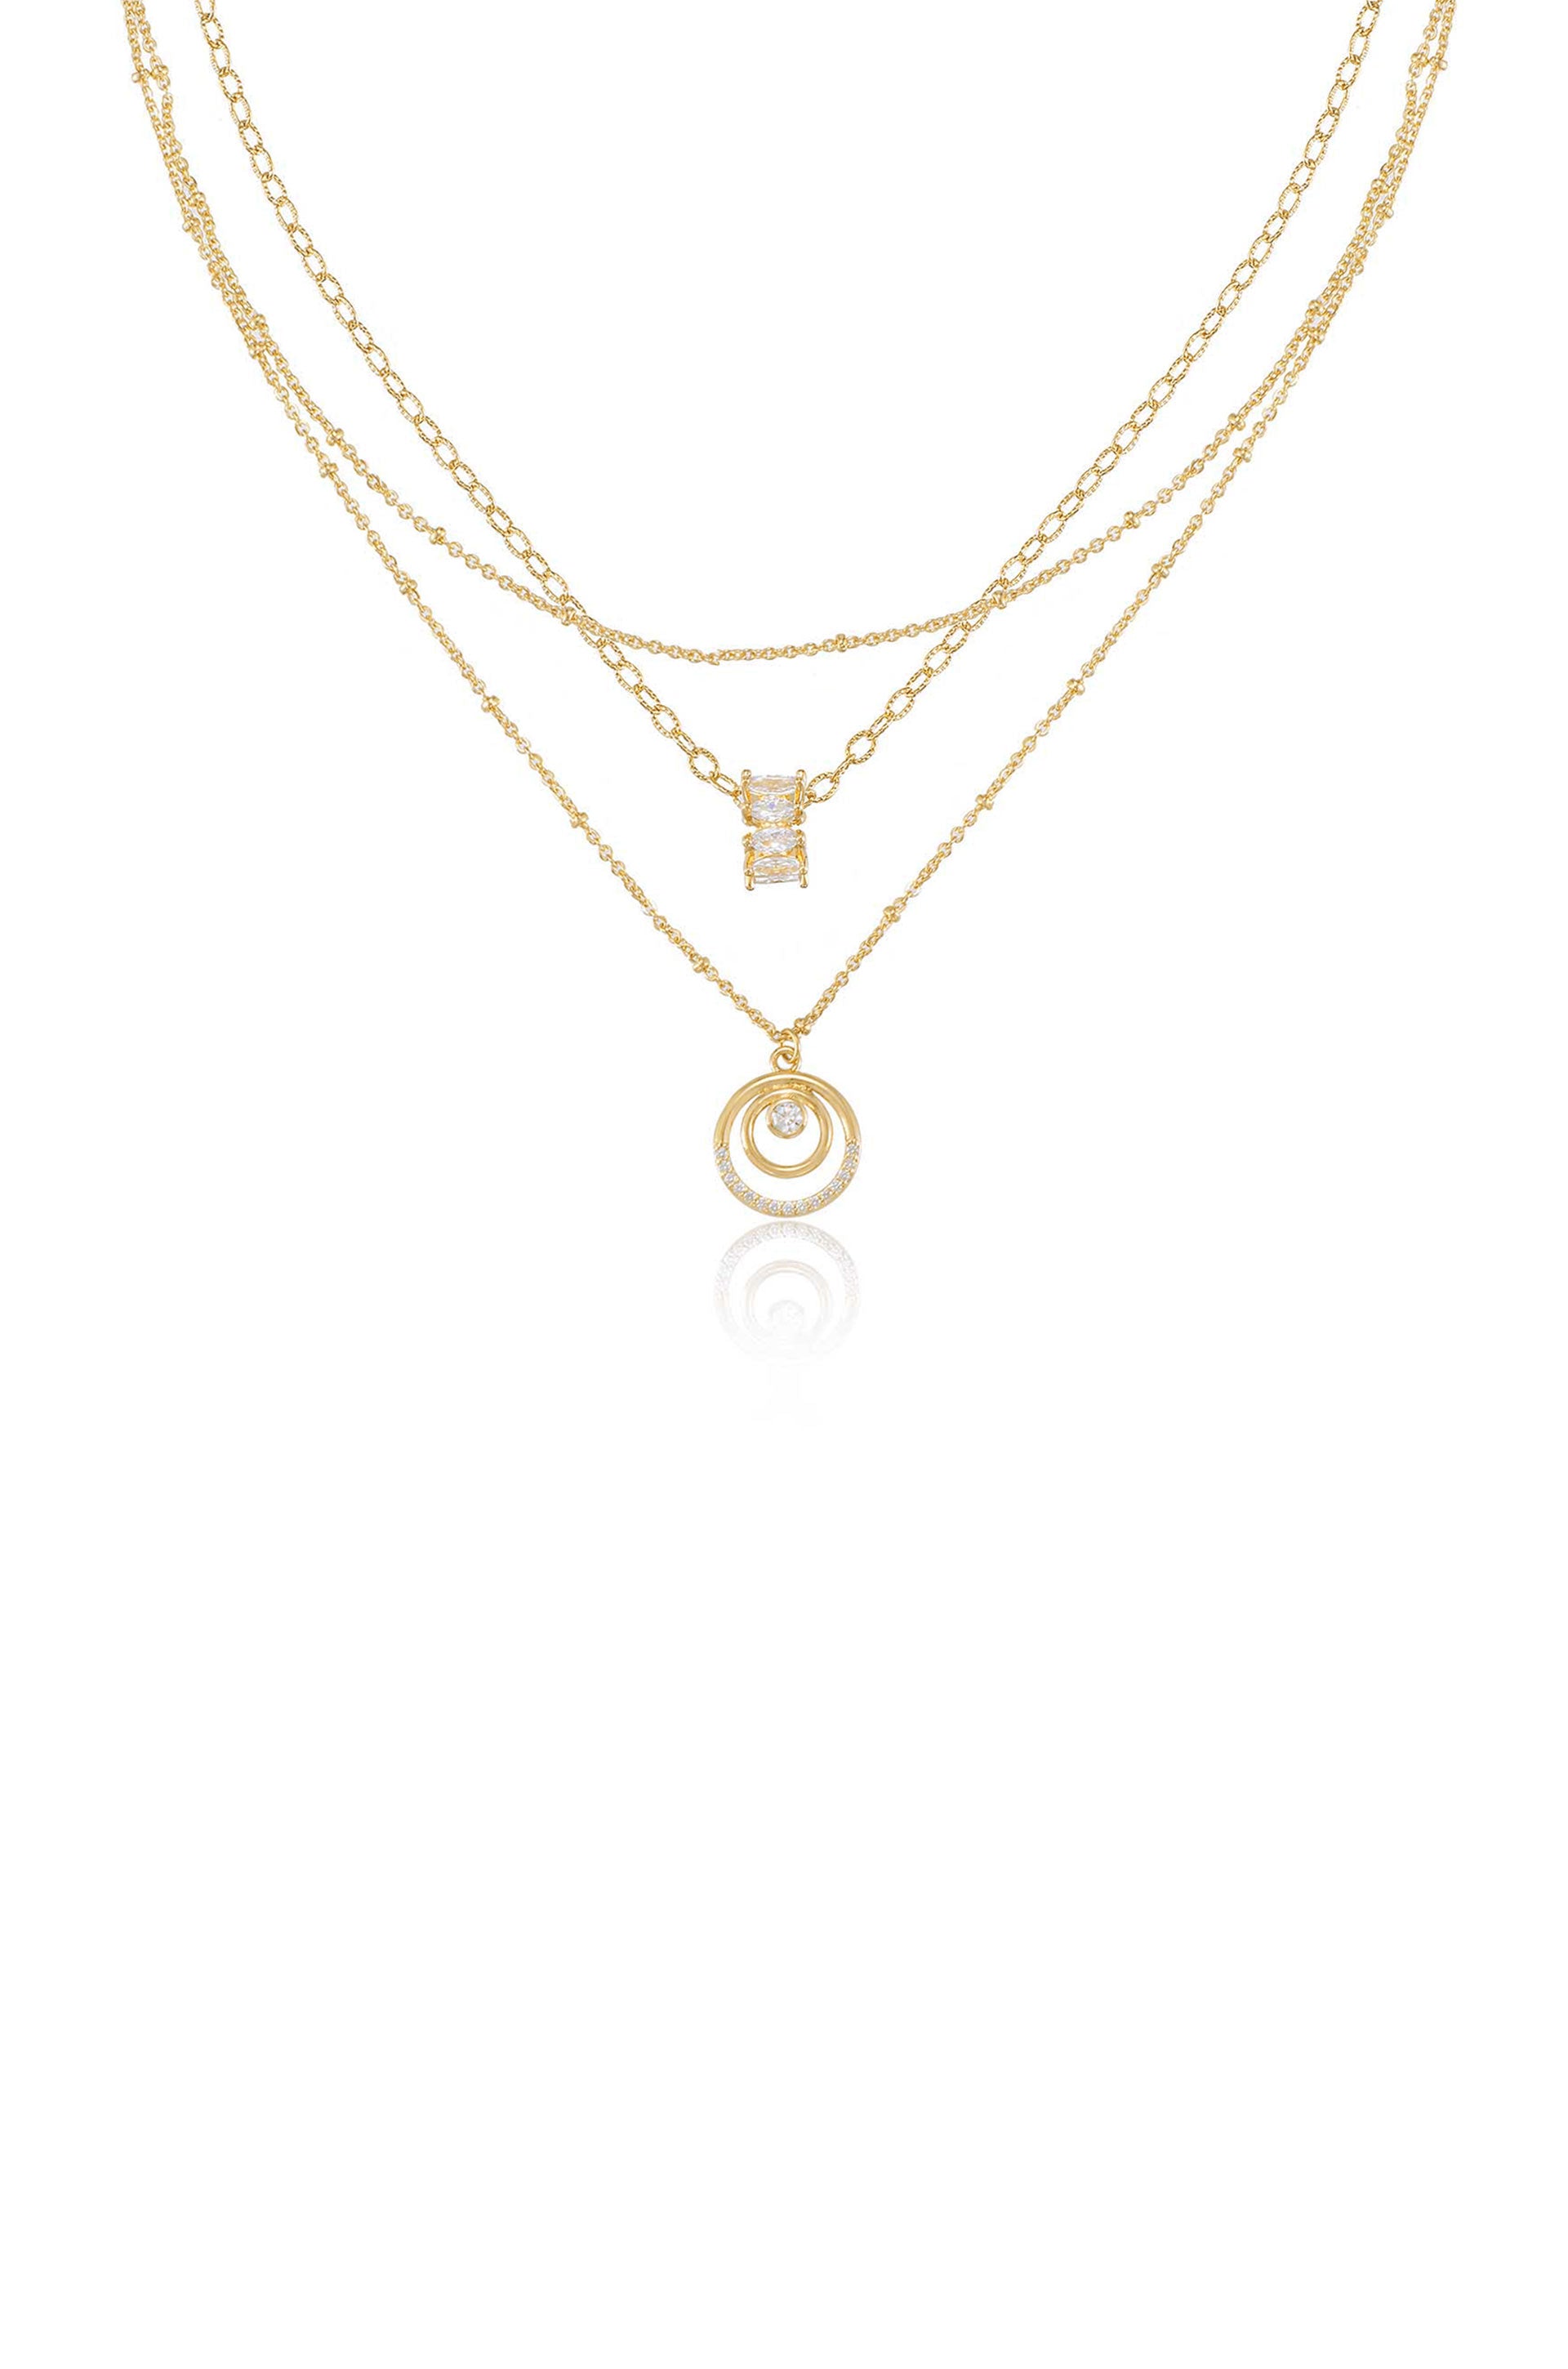 Circles of Crystal Dainty Layered 18k Gold Plated Necklace Set